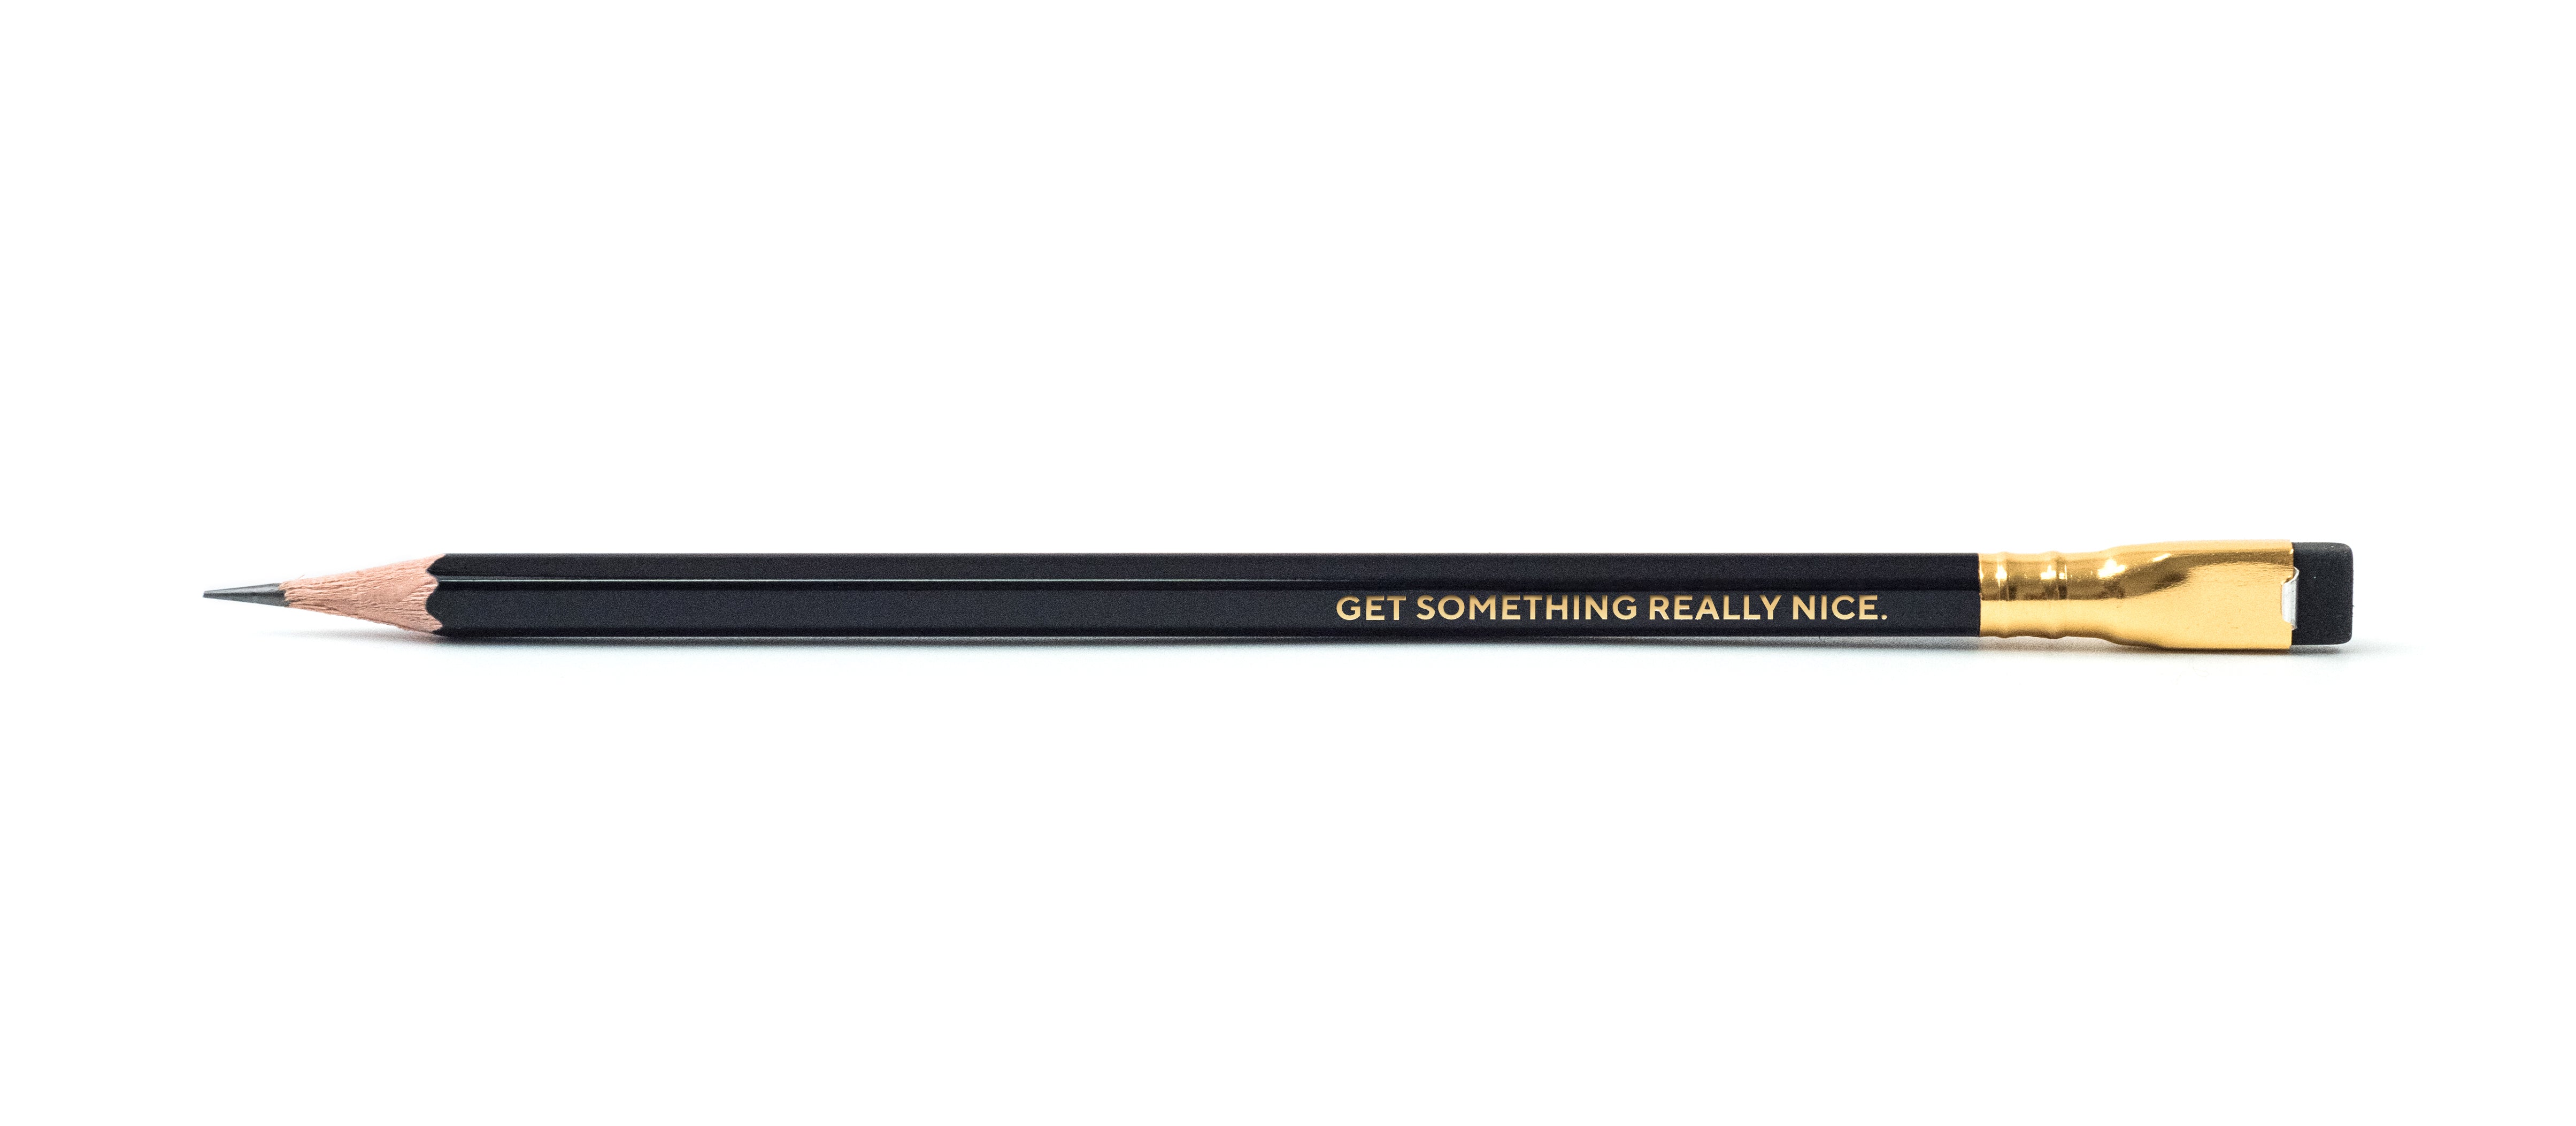 Blackwing Gift Card Pencil